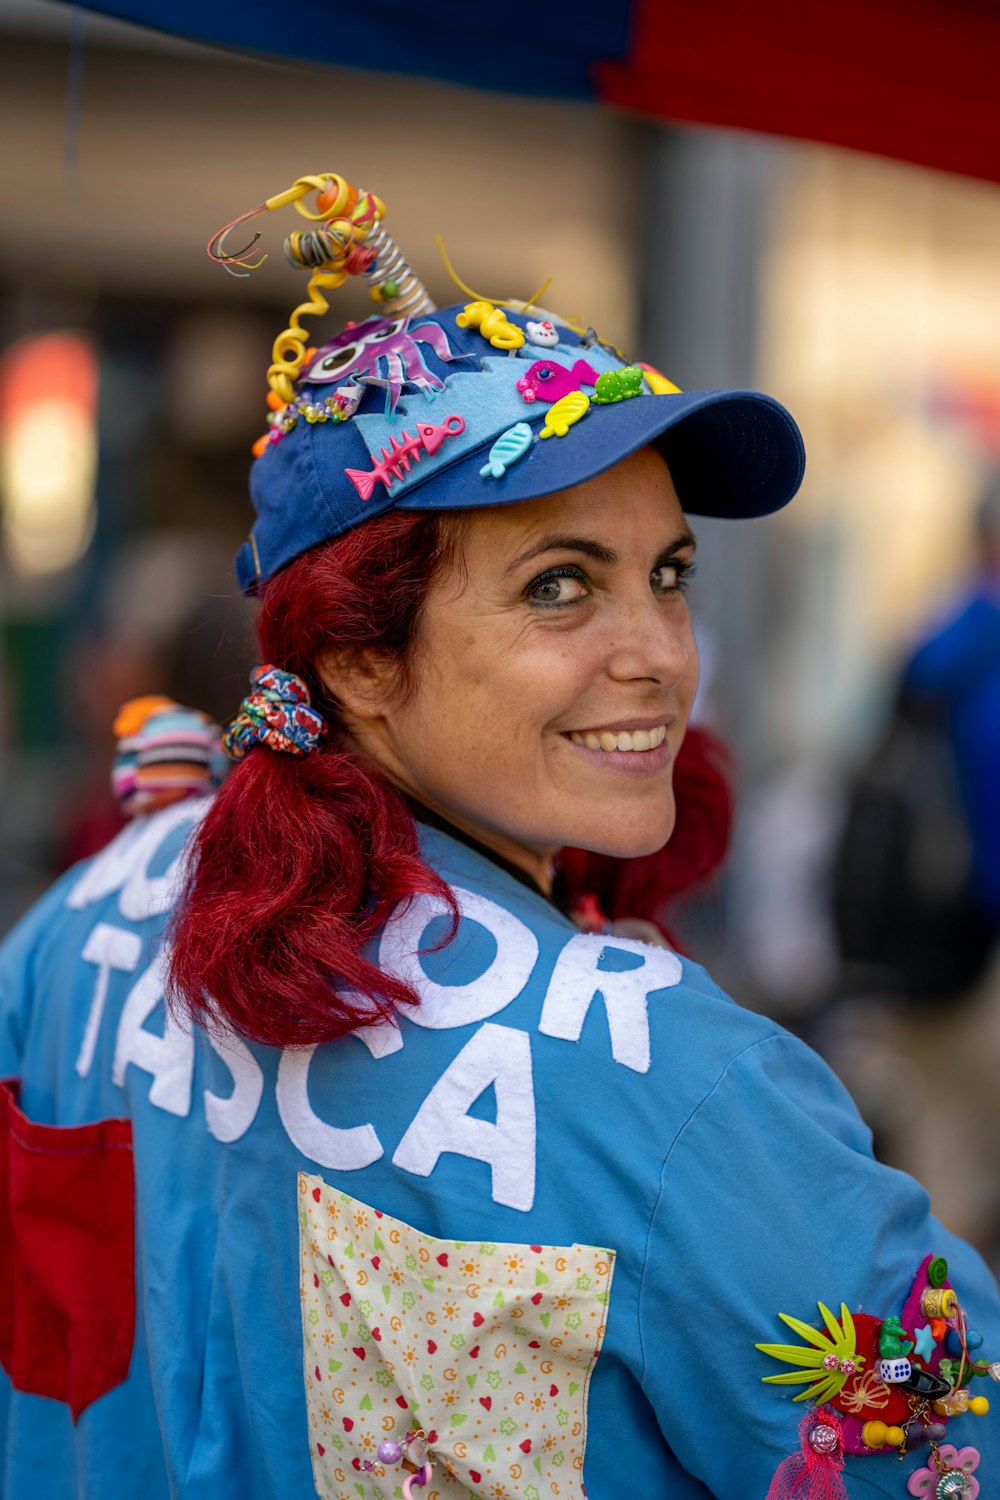 a woman with red hair wearing a blue hat